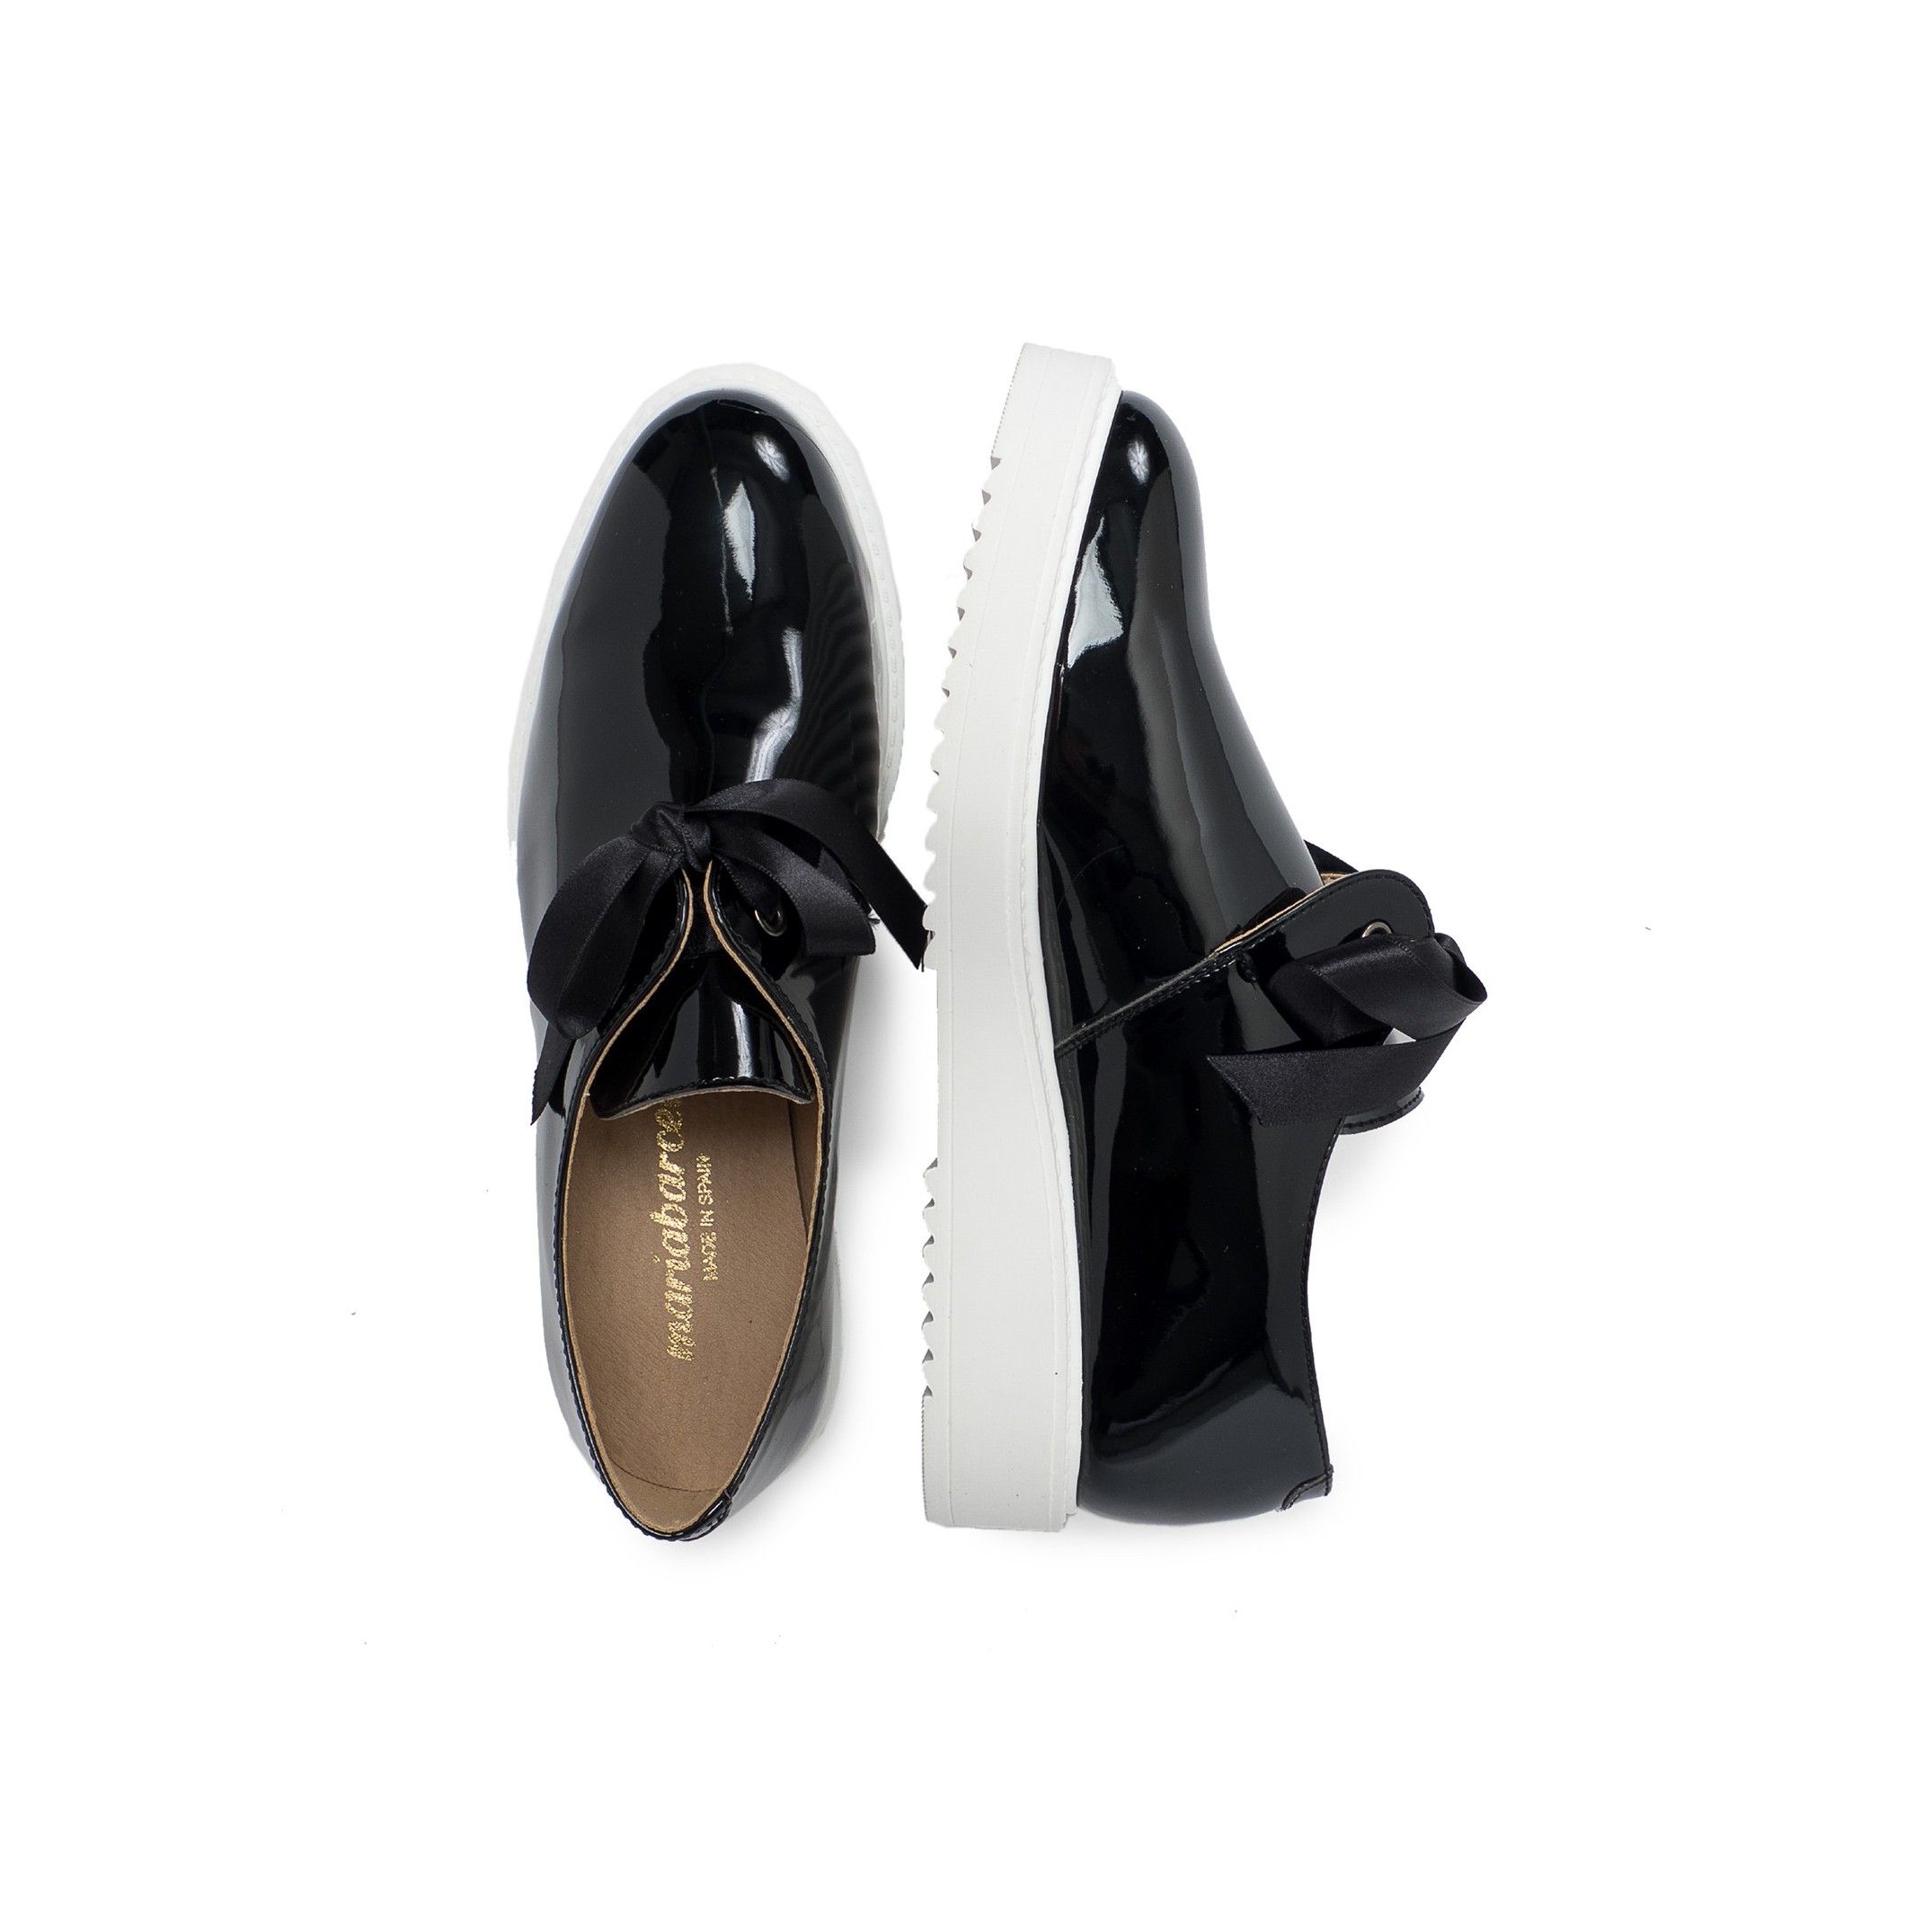 Women shoes with bow, by Maria Barcelo. Upper: leatherette. Laces closure. Inner lining and insole: Breathable, anti-allergic microfiber and keeps the inside of the footwear dry. Sole material: synthetic. Heel height: 3 cm. Platform: 2 cm Designed and manufactured in Spain.